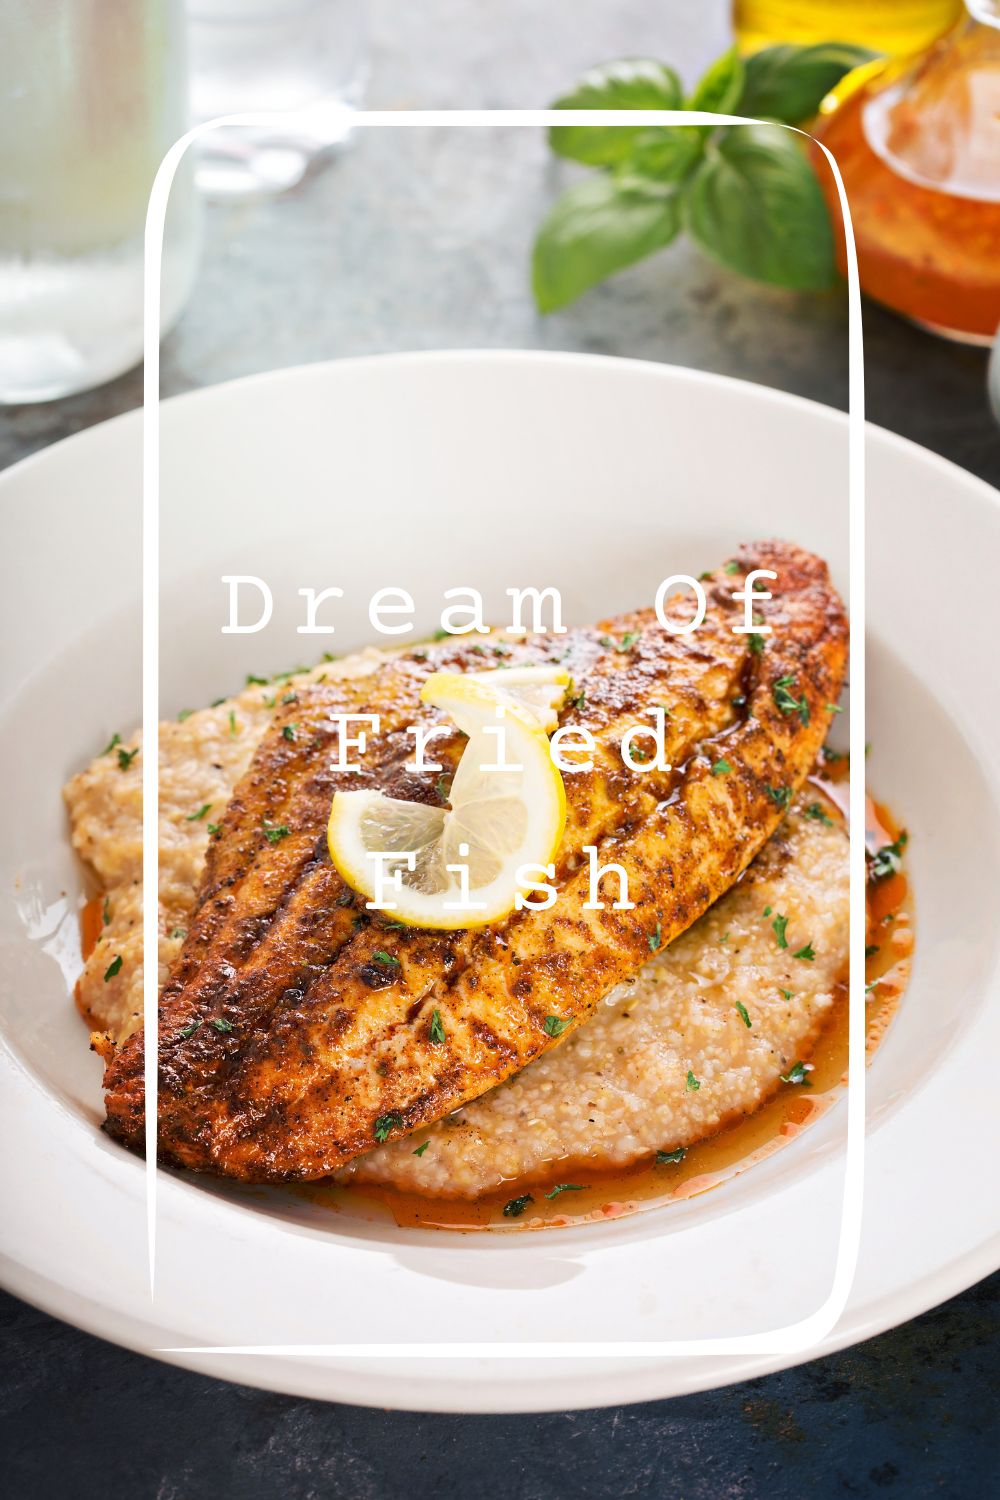 Dream Of Fried Fish Meanings 2